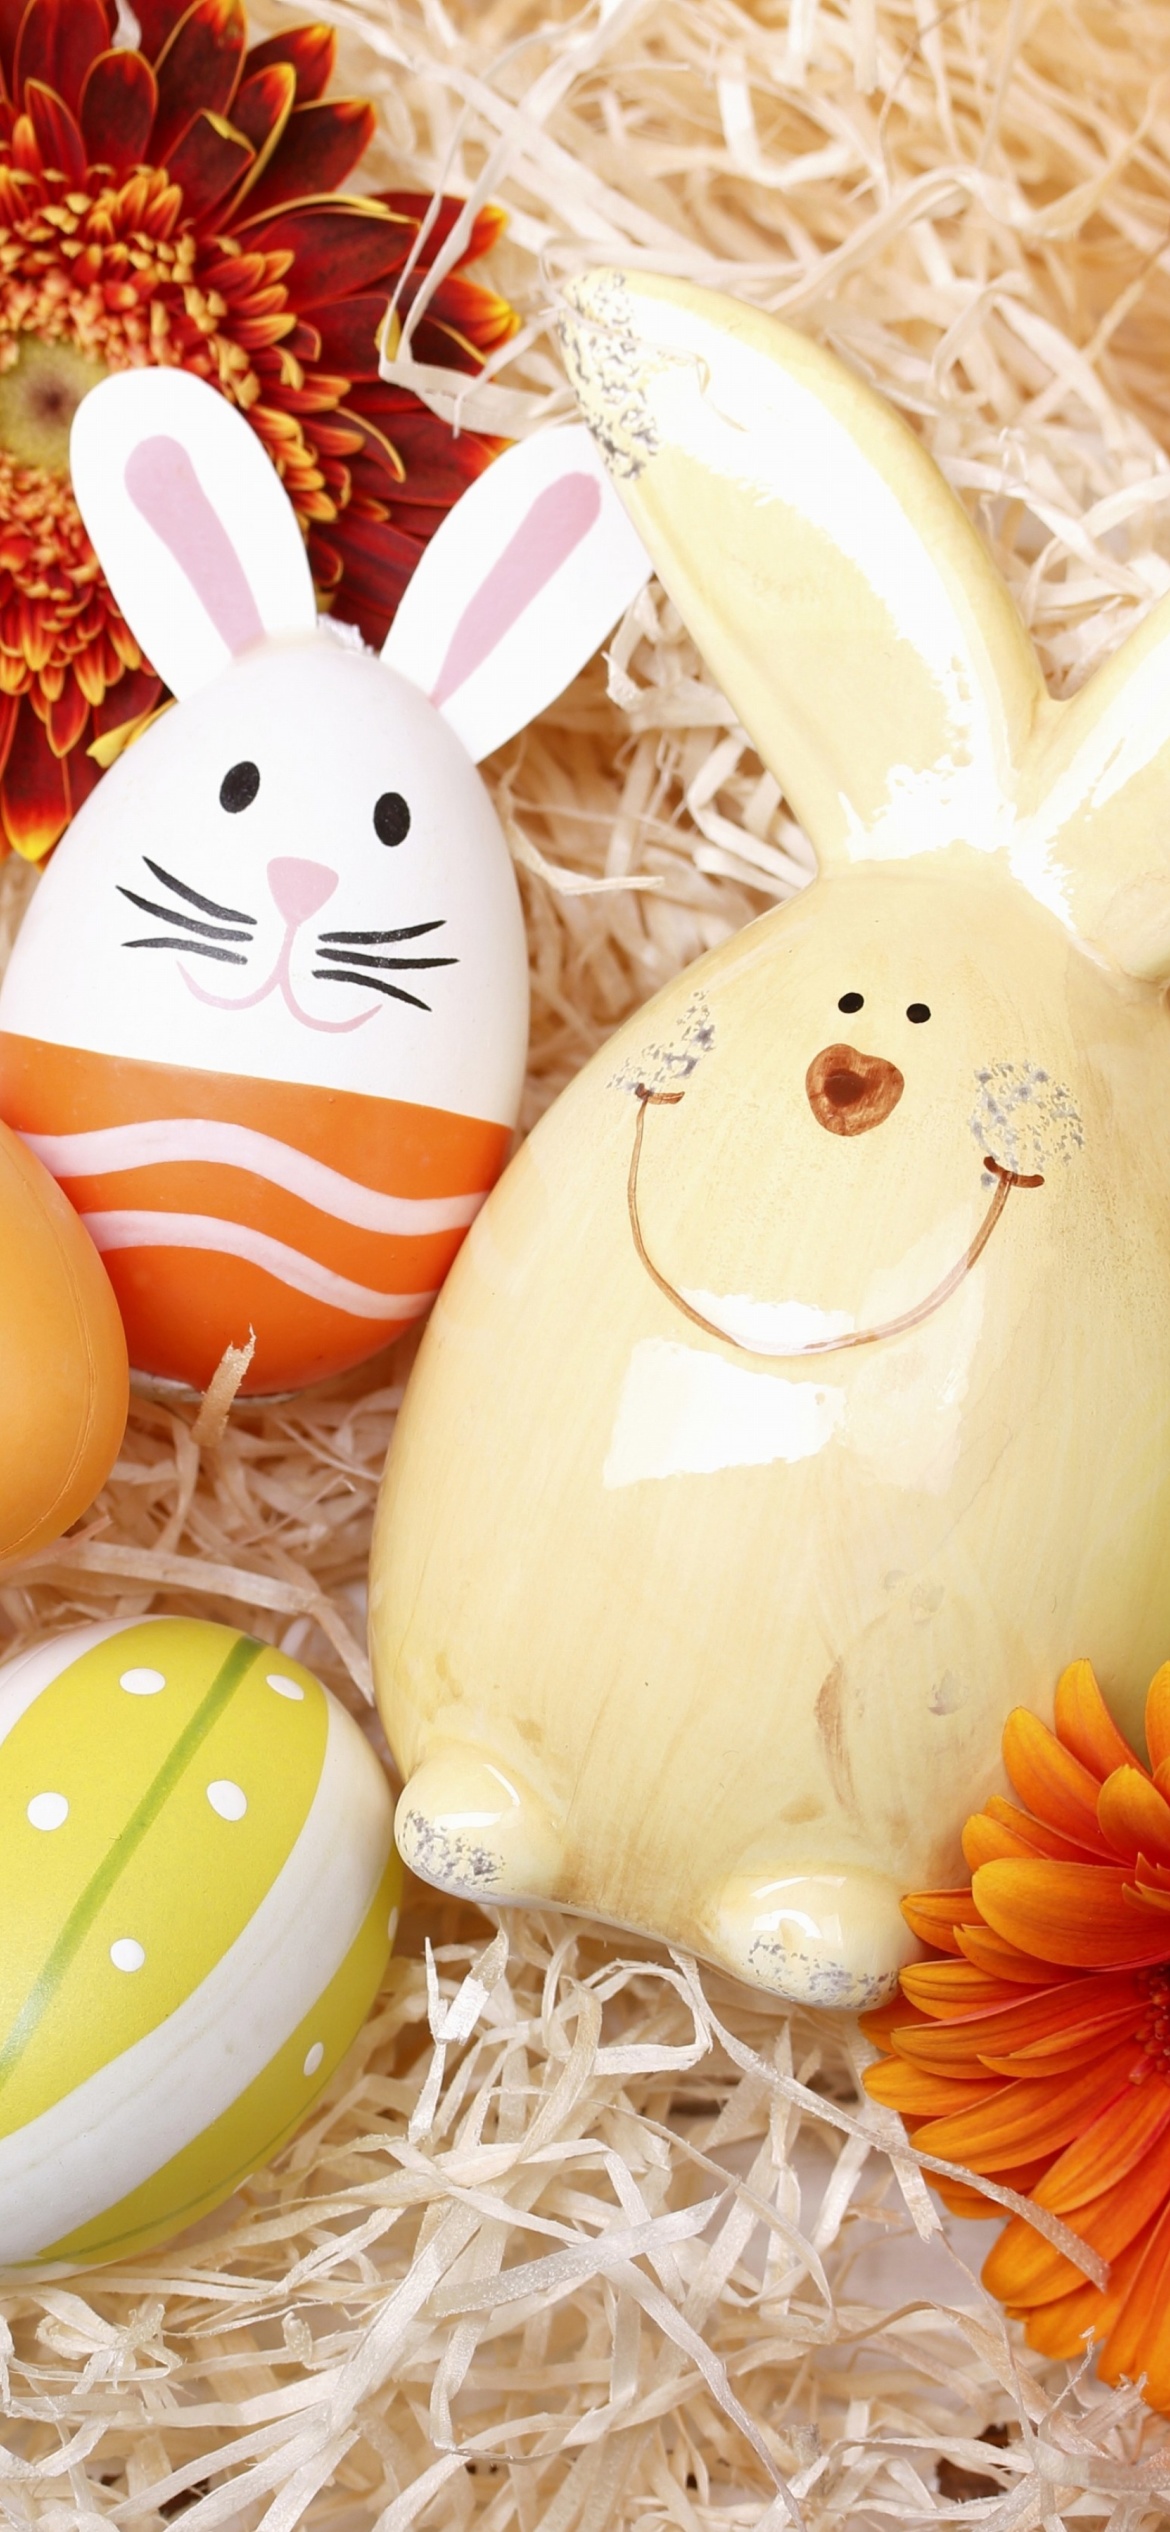 Обои Easter Eggs Decoration with Hare 1170x2532